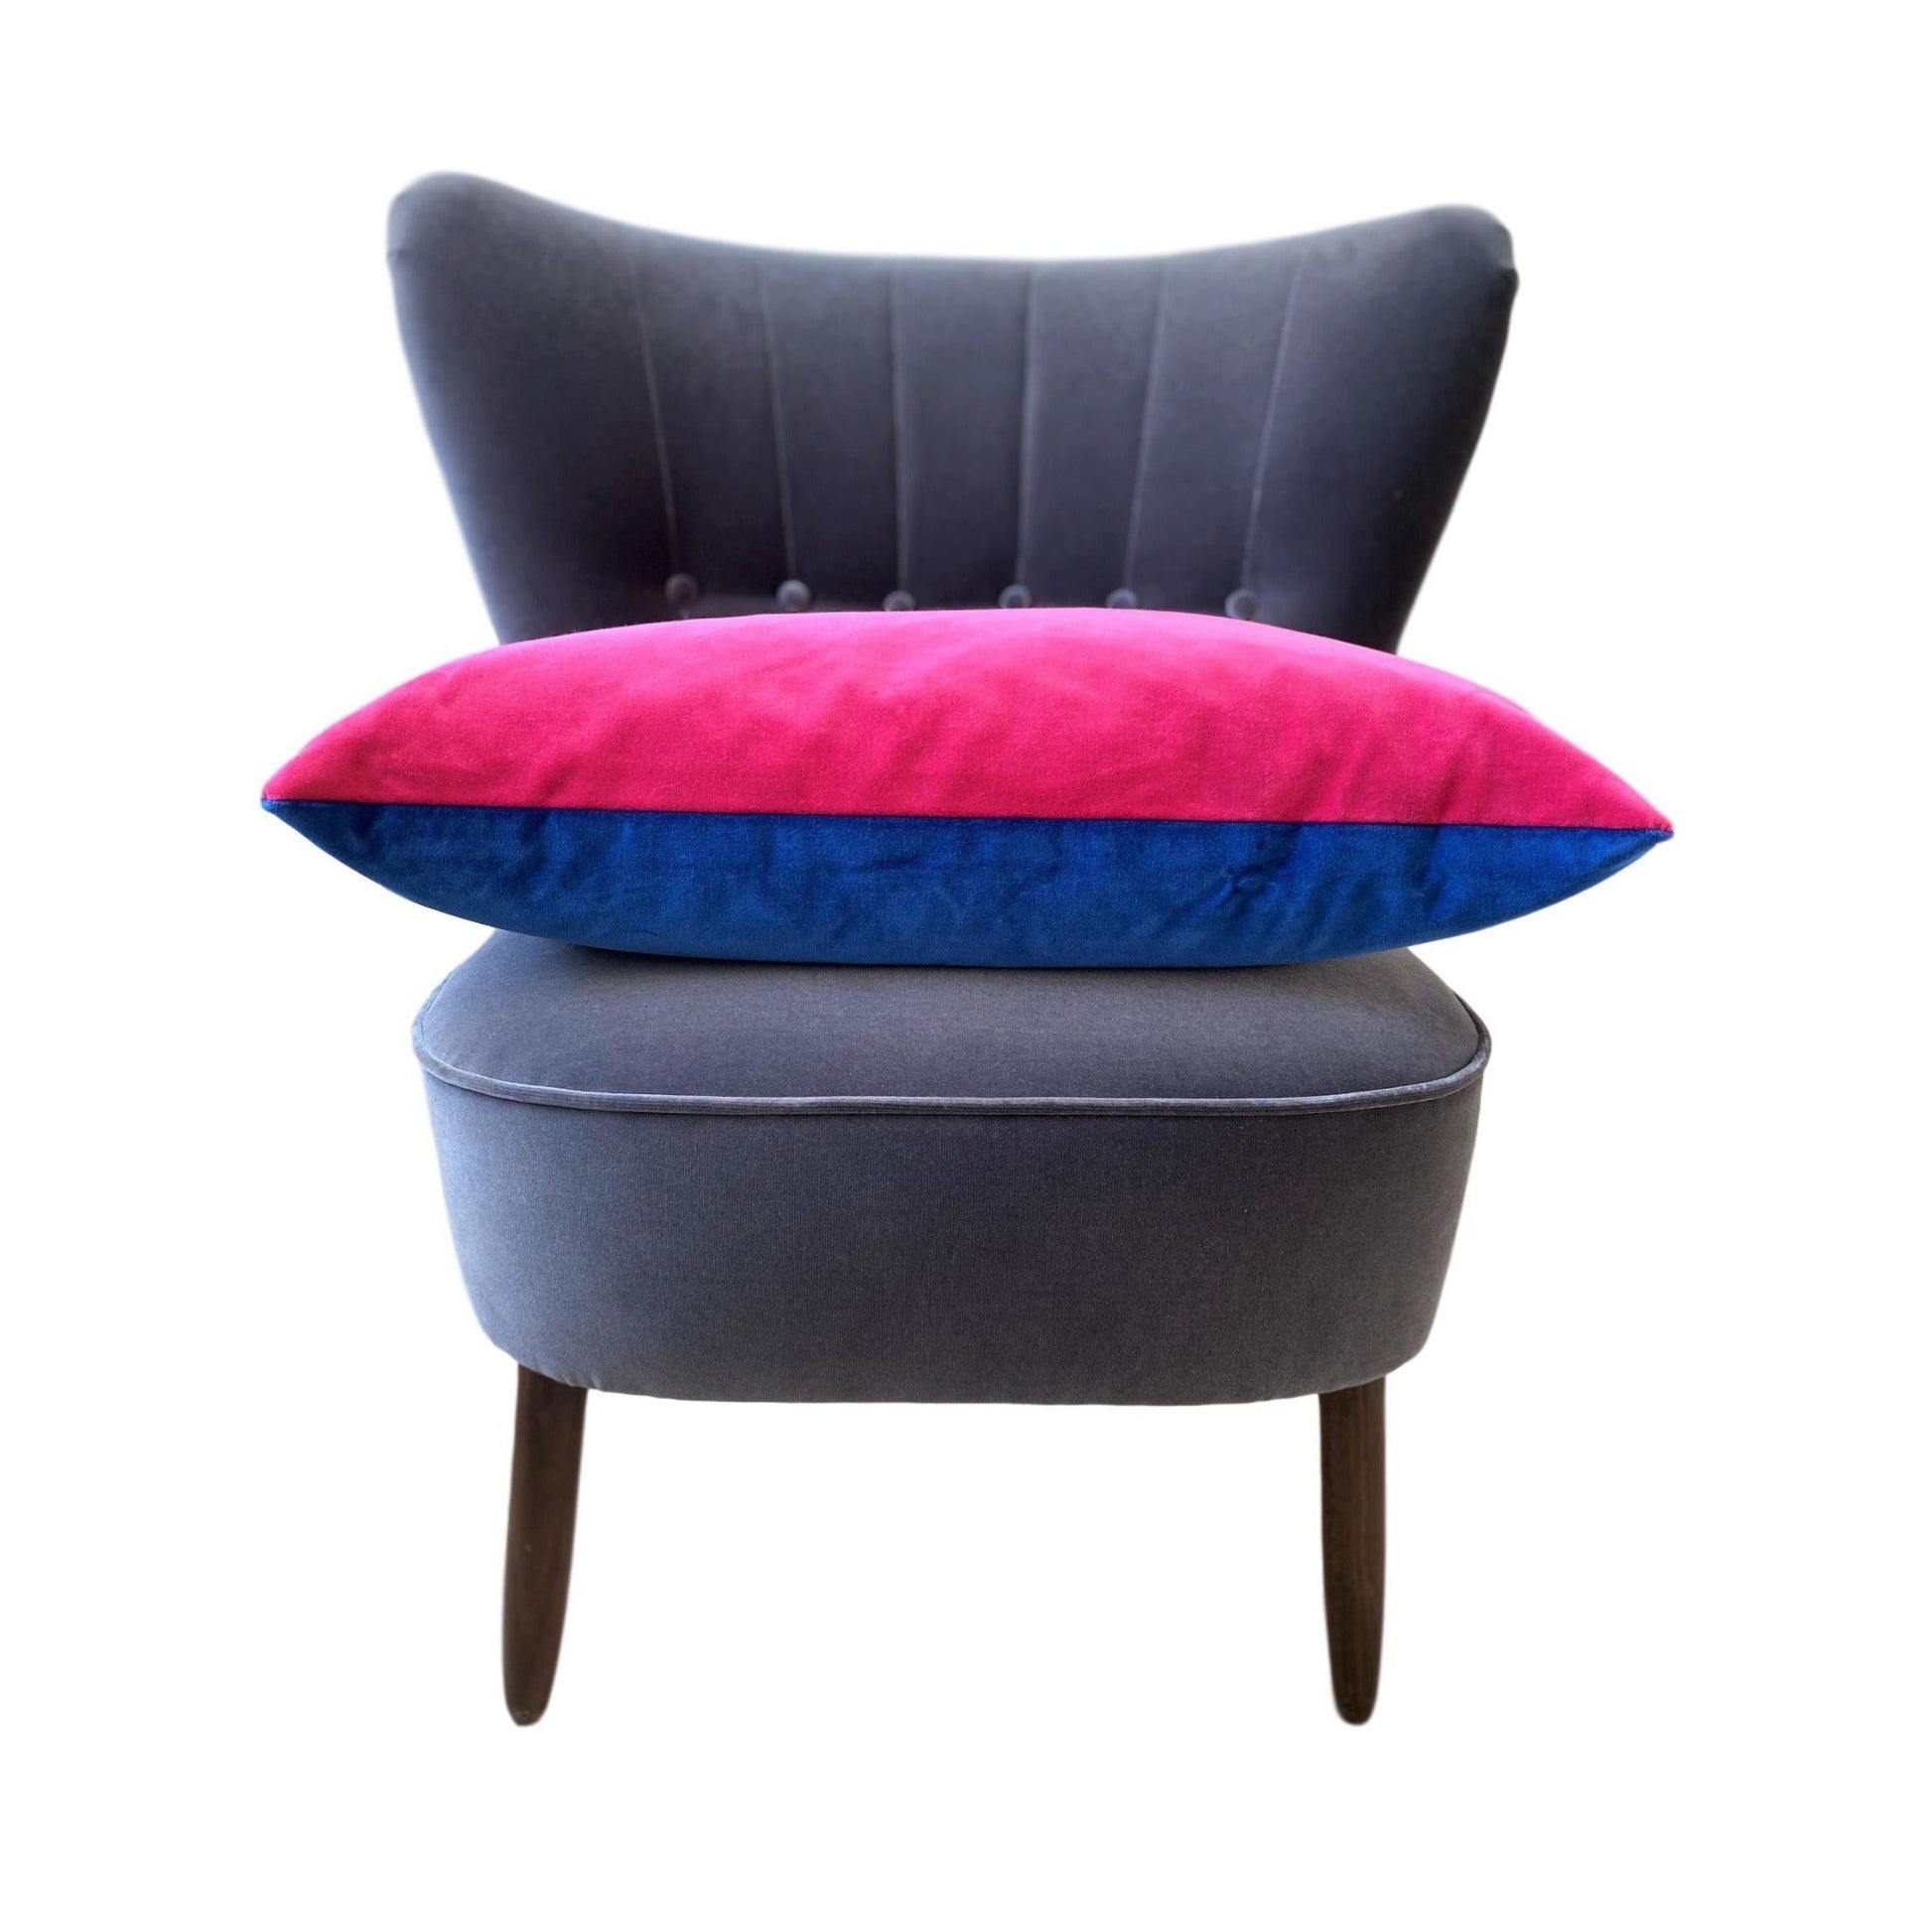 Bright Pink Velvet Cushion Cover with Royal Blue-Luxe 39